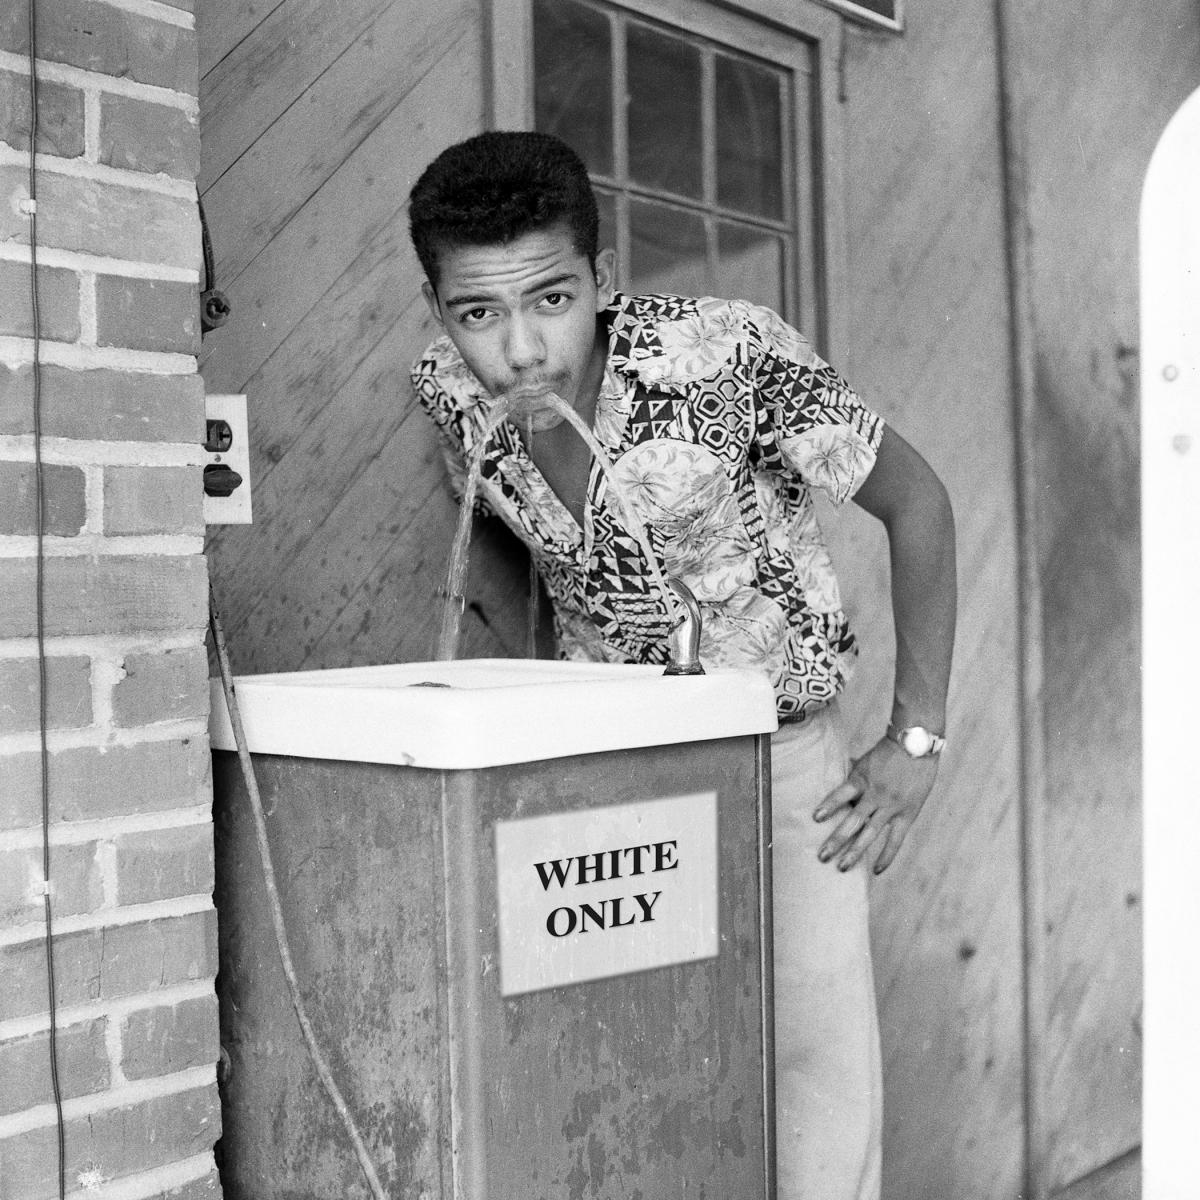 Water fountain with "white only" sign in 1956